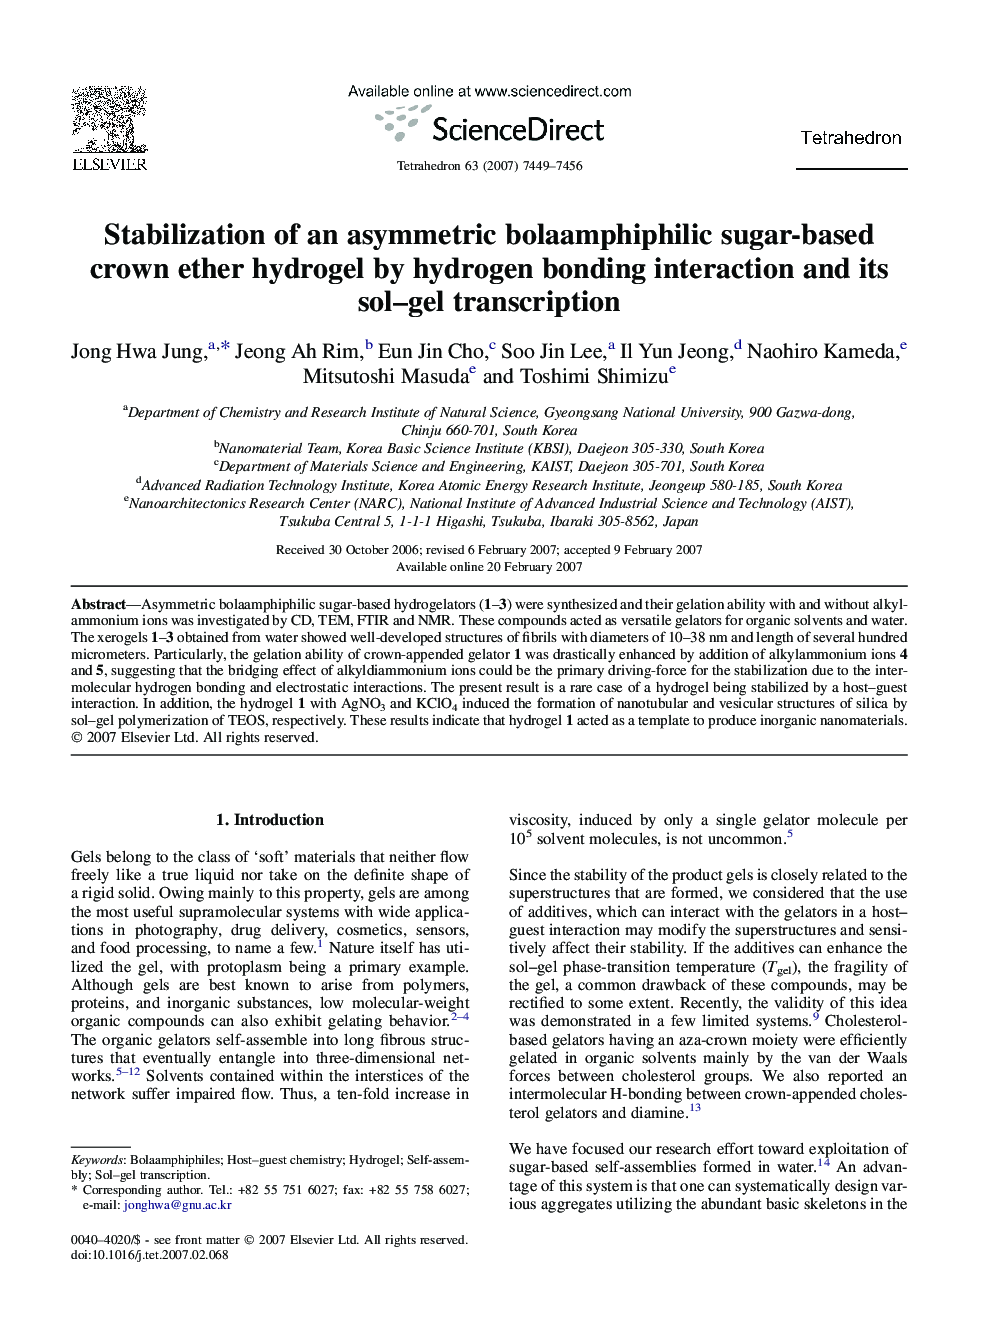 Stabilization of an asymmetric bolaamphiphilic sugar-based crown ether hydrogel by hydrogen bonding interaction and its sol-gel transcription